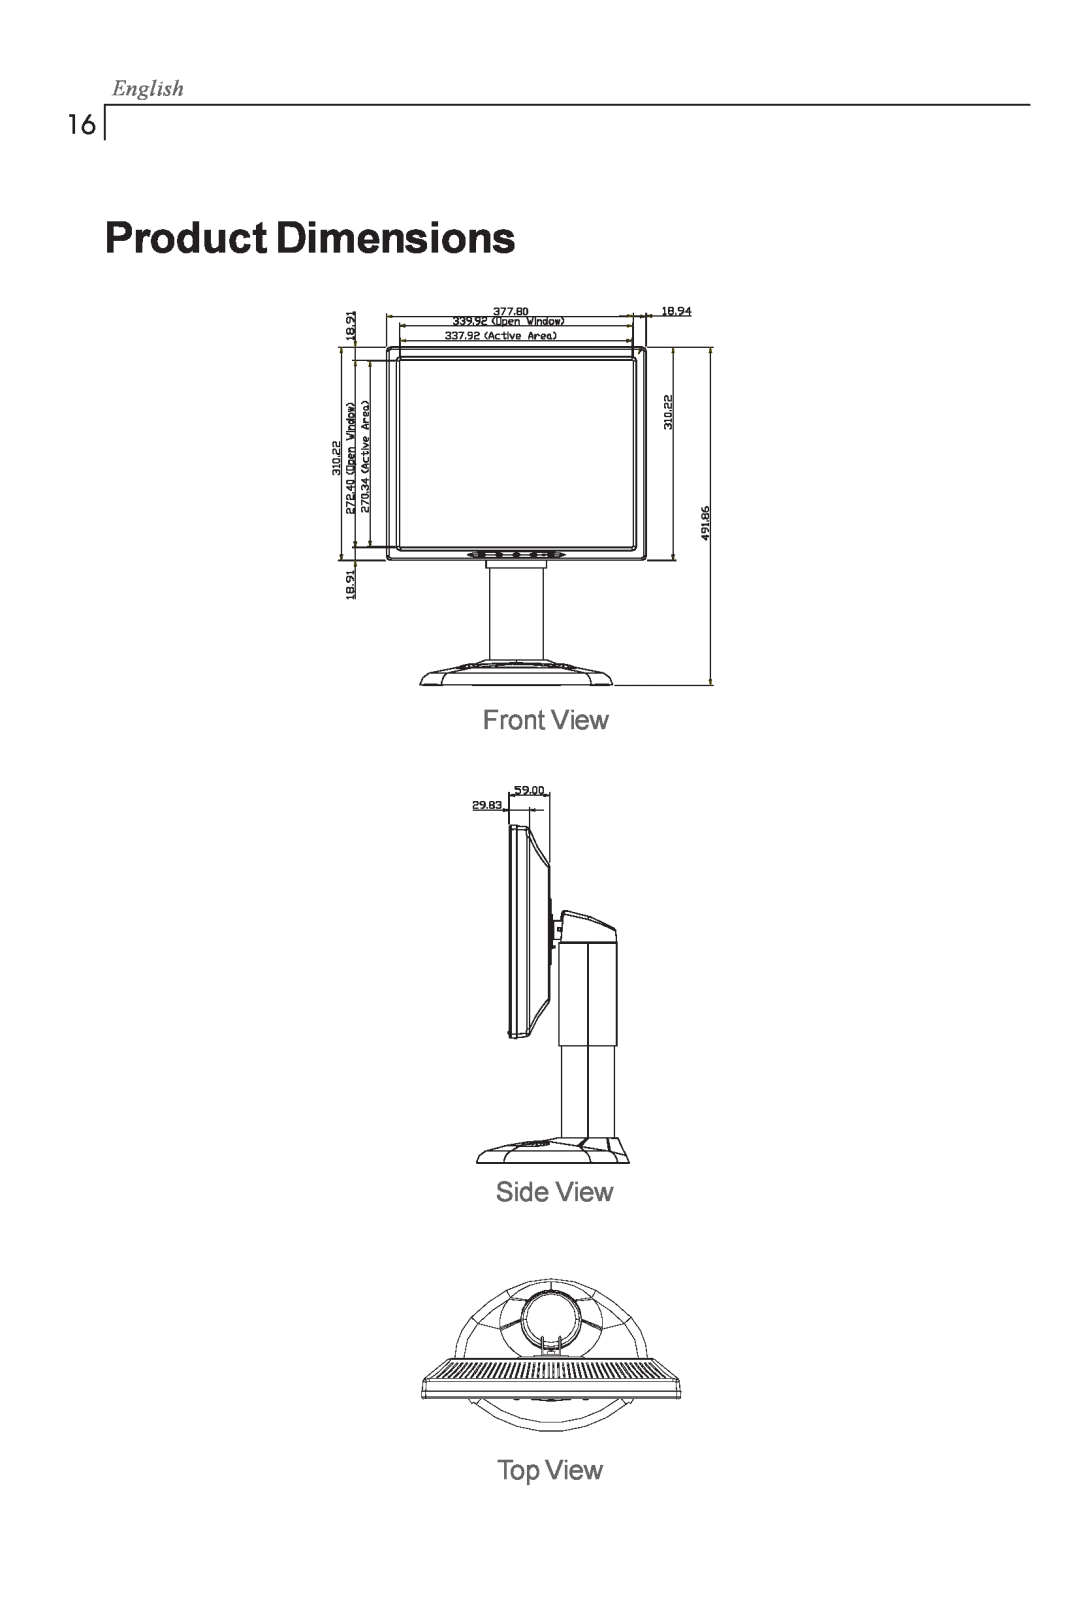 Planar PX1710M manual Product Dimensions, Front View Side View, Top View, English 